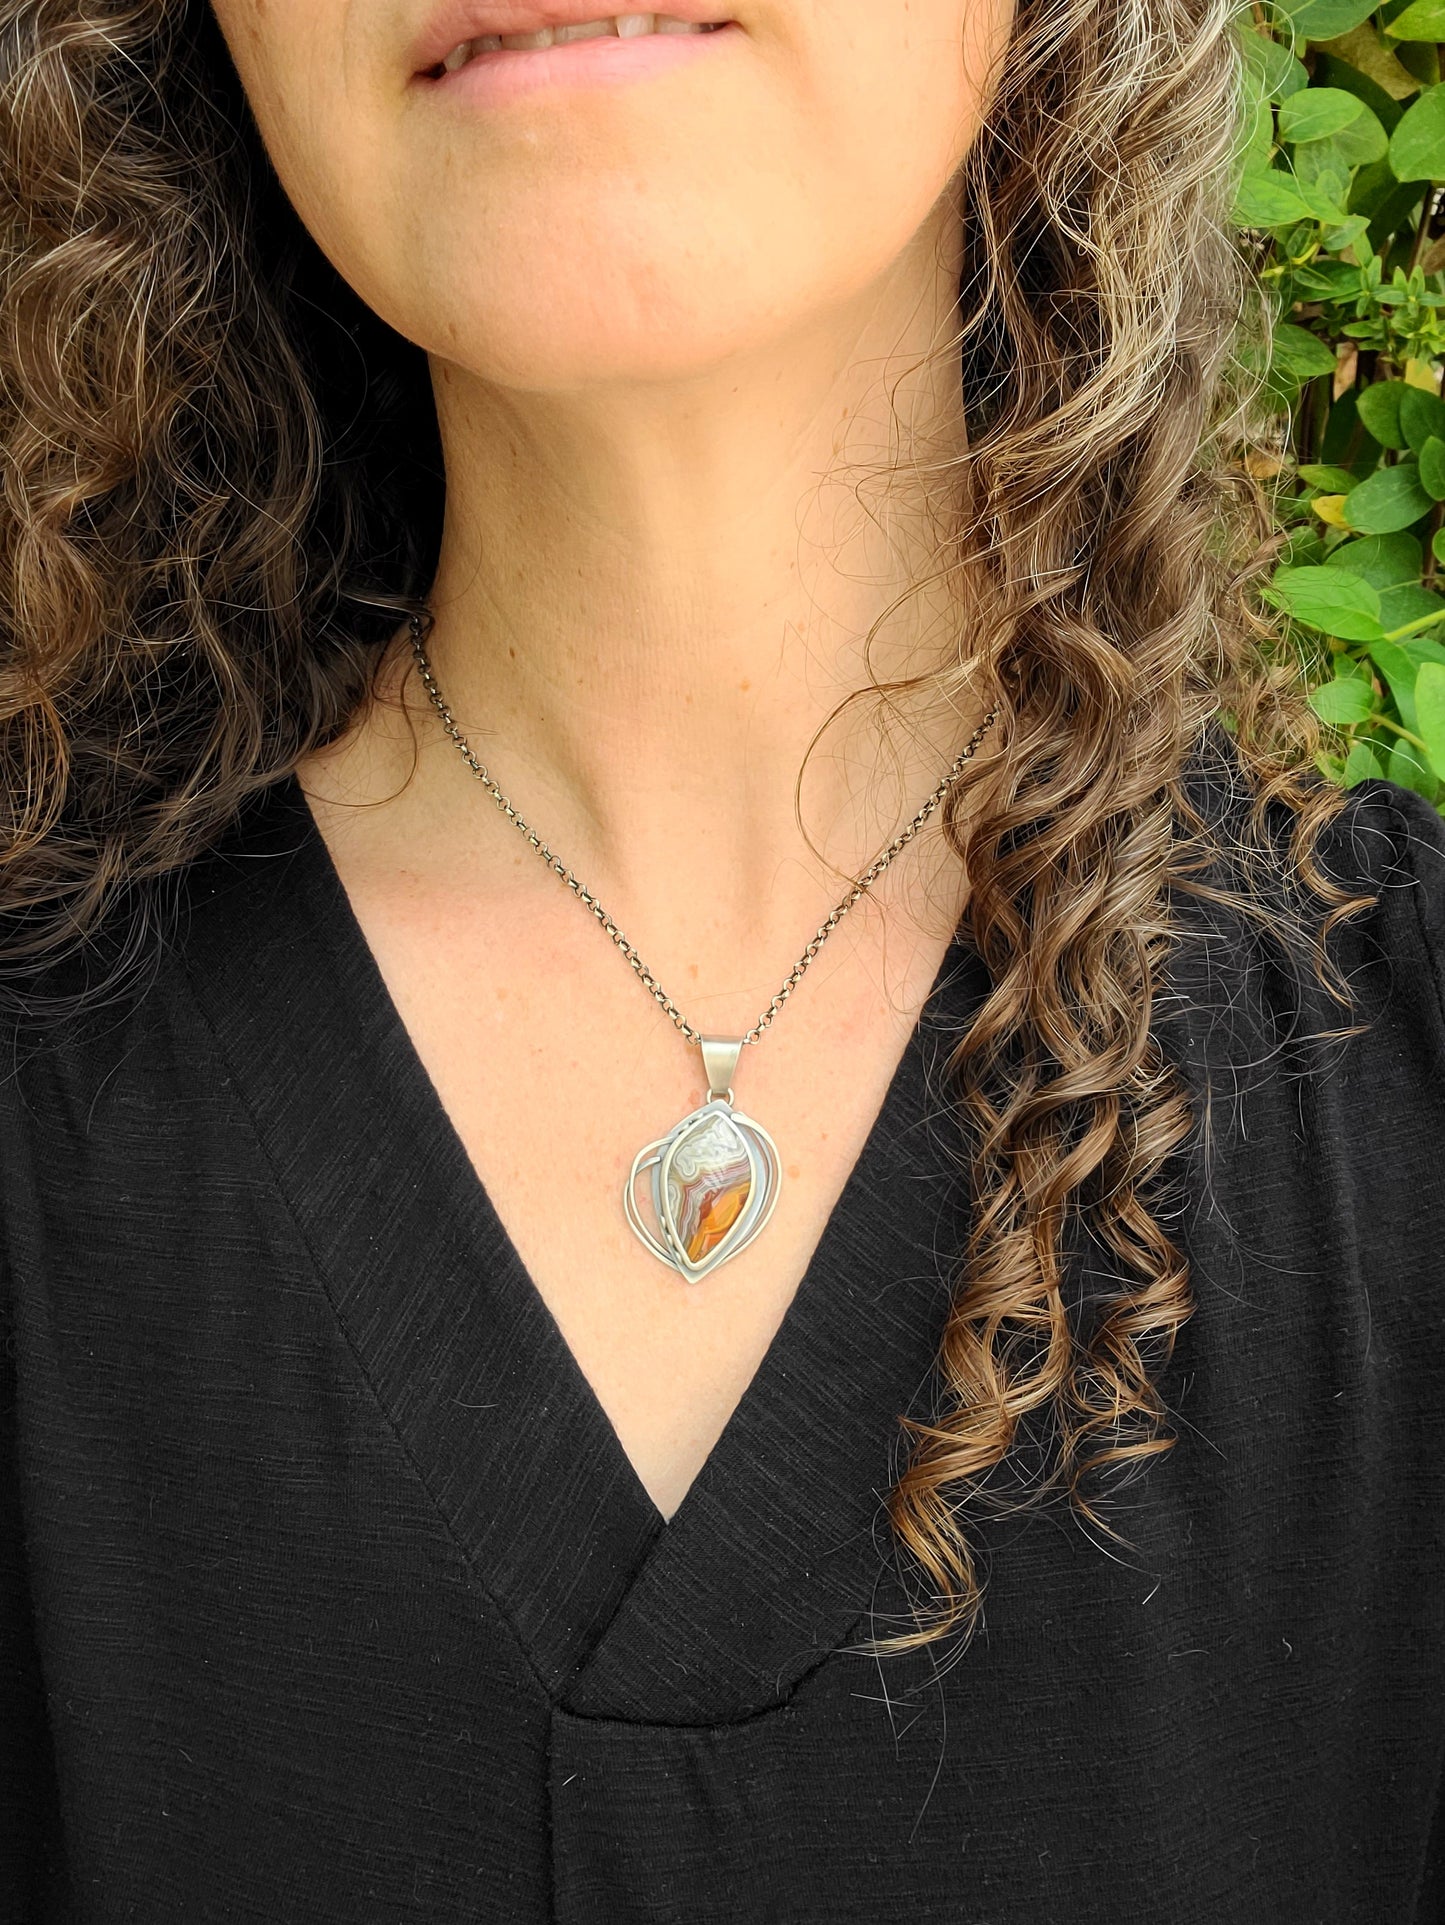 Skipping Stones Pendant: Red and Gray Laguna Lace Agate